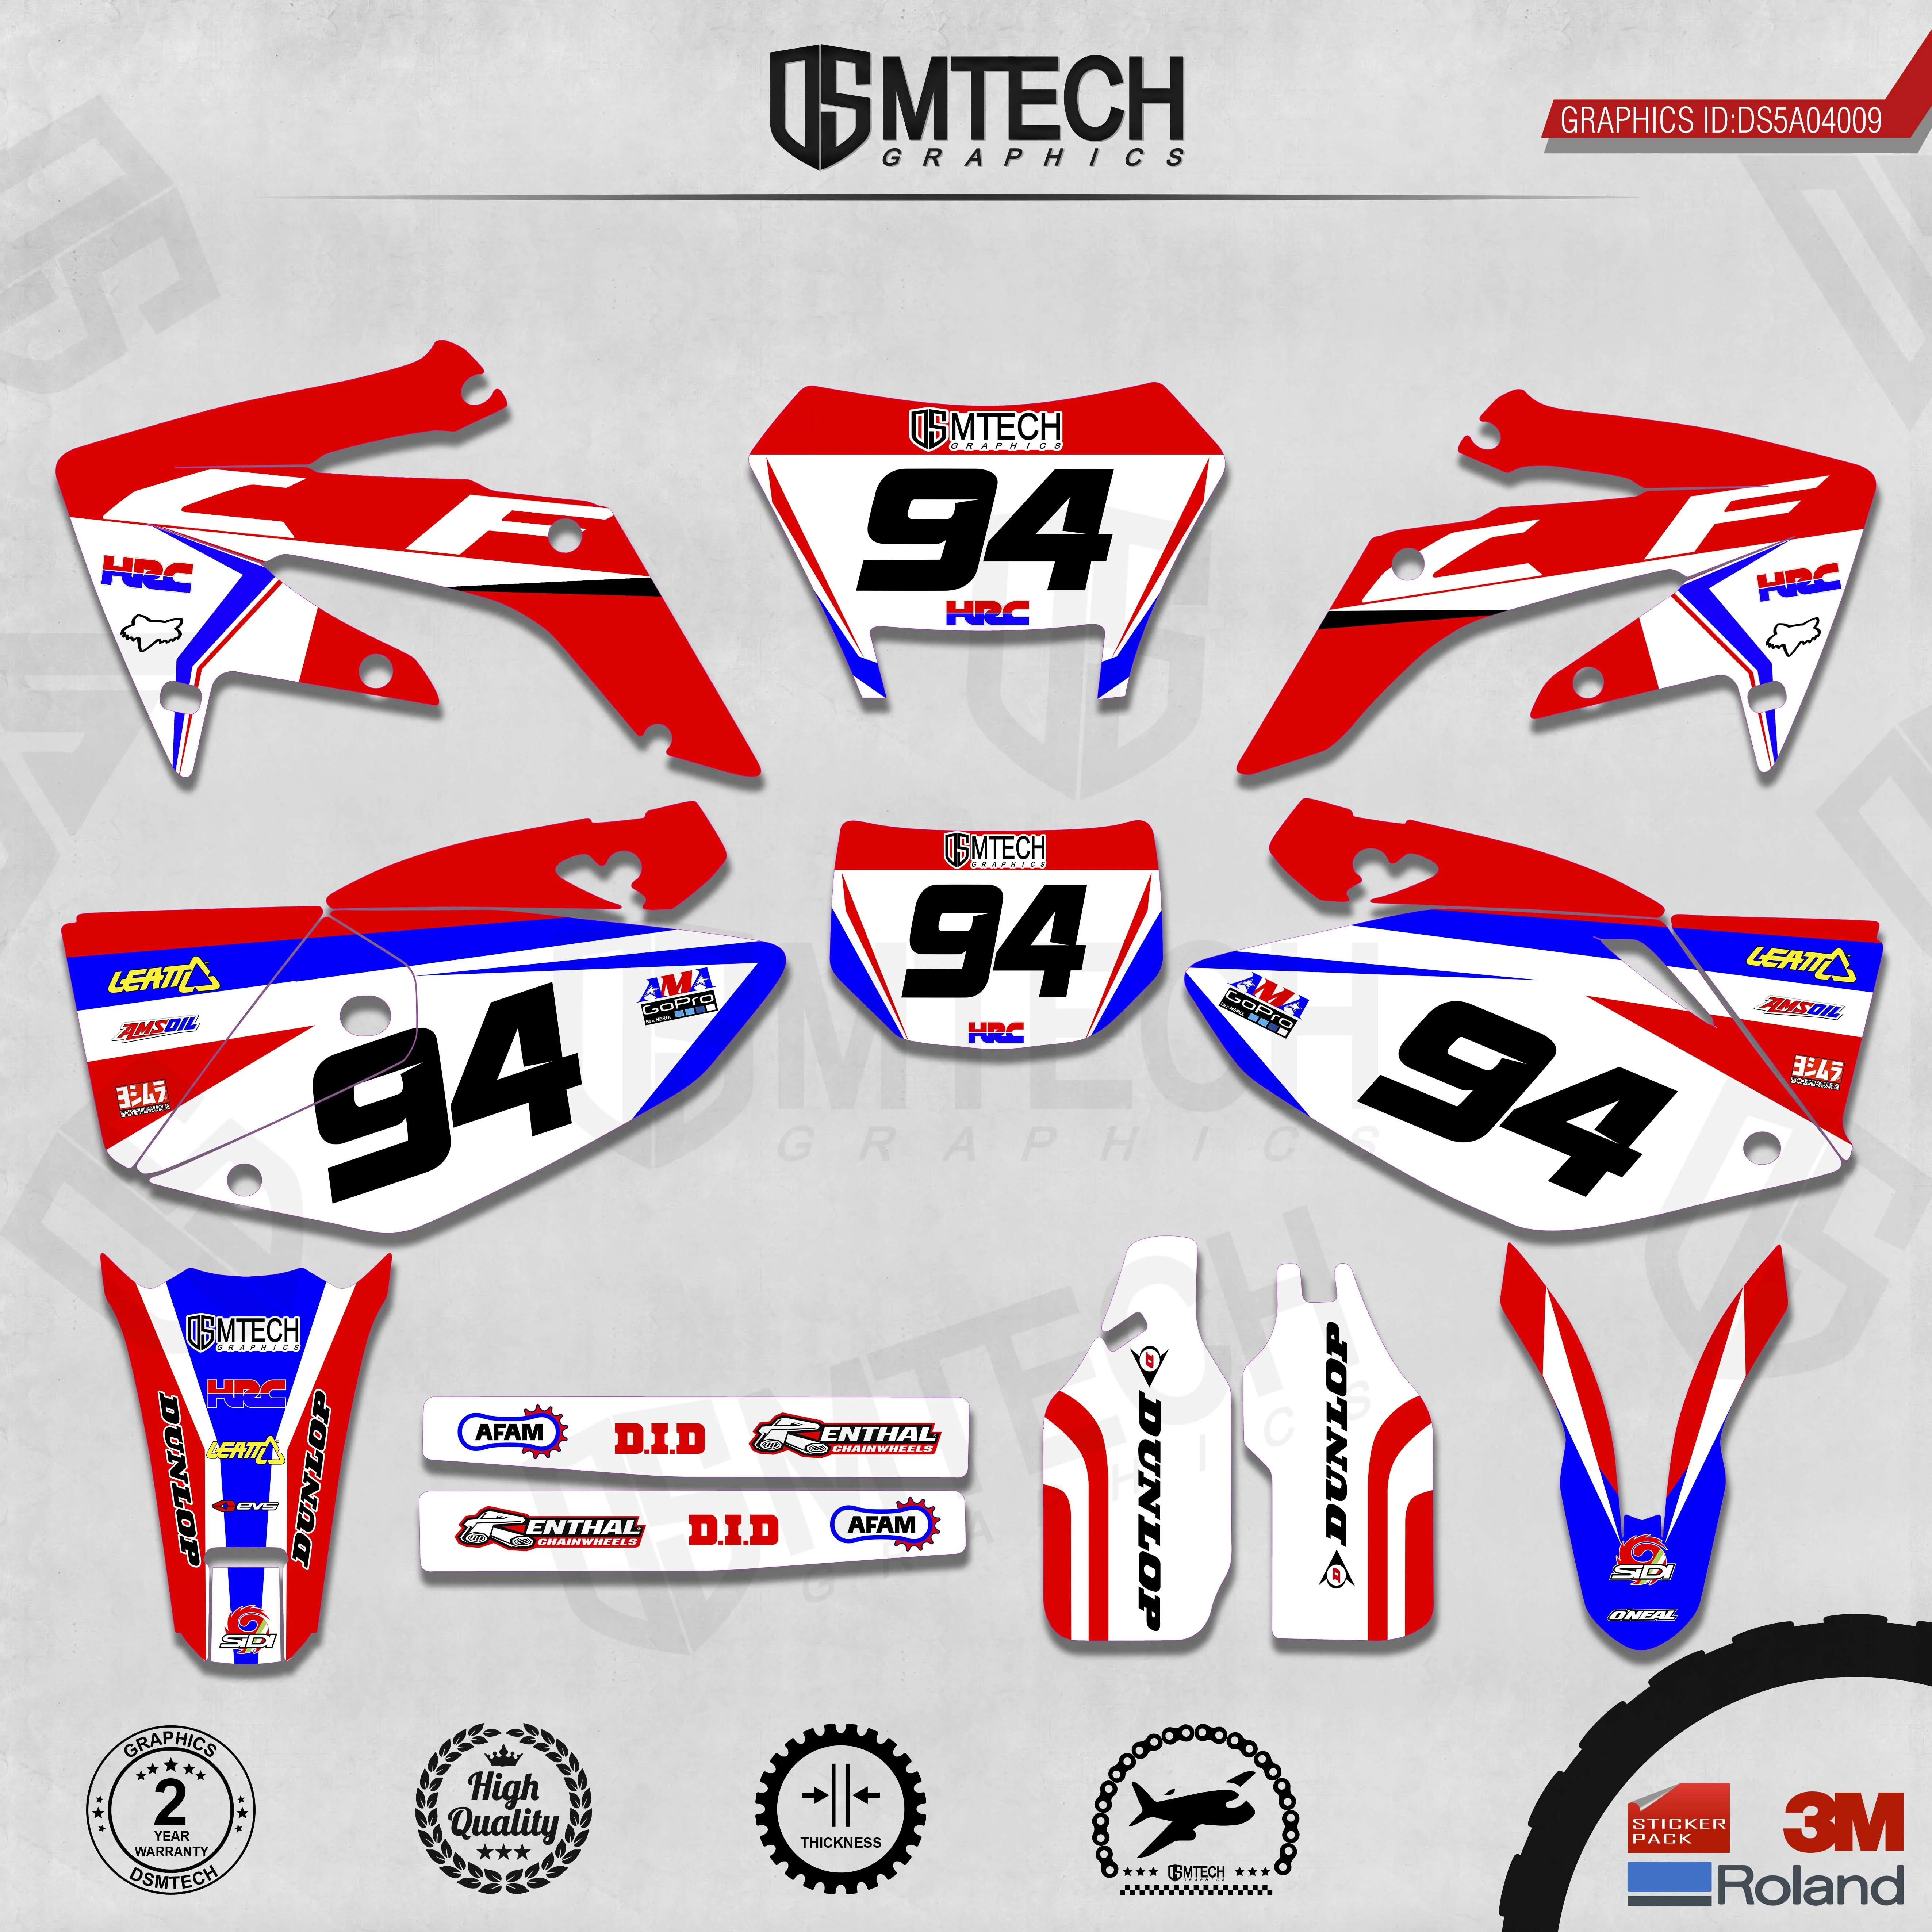 DSMTECH Customized Team Graphics Backgrounds Decals 3M Custom Stickers For 2004-2007 2008-2011 2012-2015 2016-2019 CRF250X 009